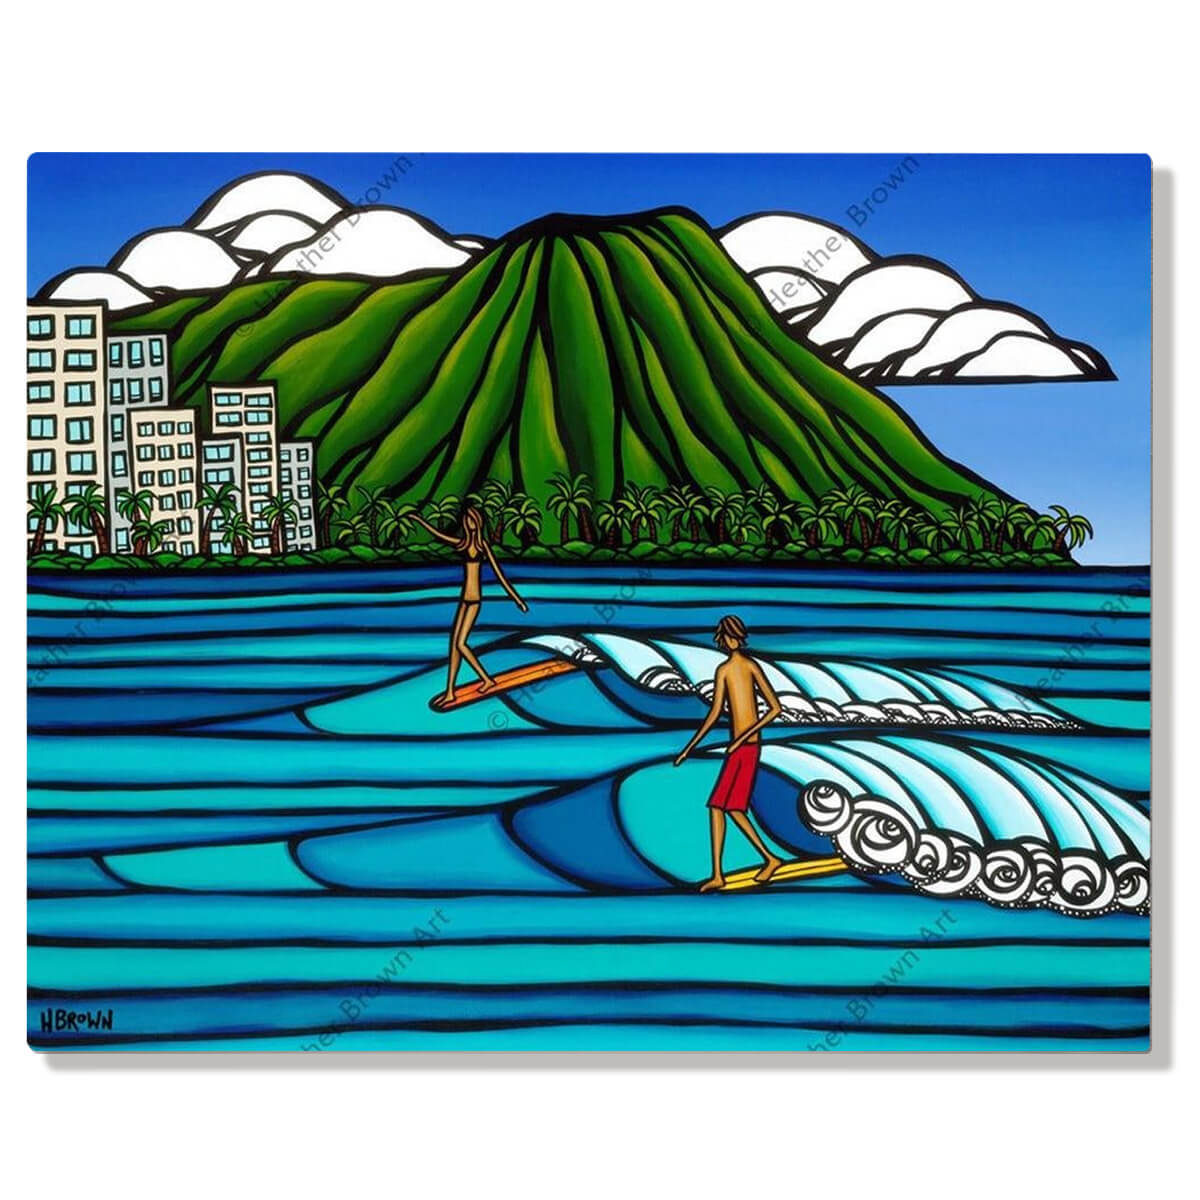 A metal art print featuring tanned surfers, the perfect blue Waikiki waves, and the Diamond Head landscape in the background by Hawaii surf artist Heather Brown